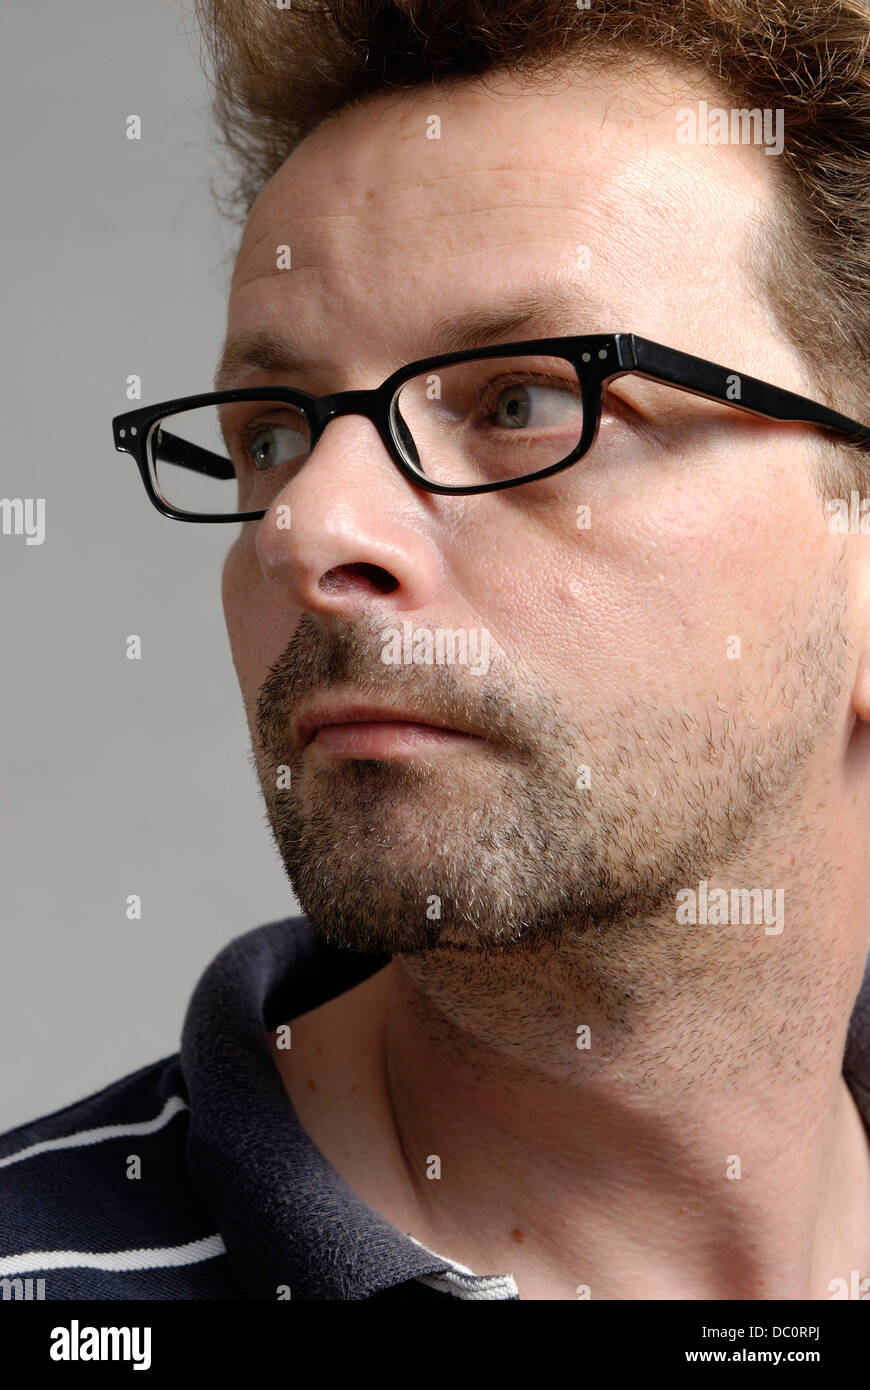 A man with glasses, a blue-white polo shirt and unshaven Stock Photo